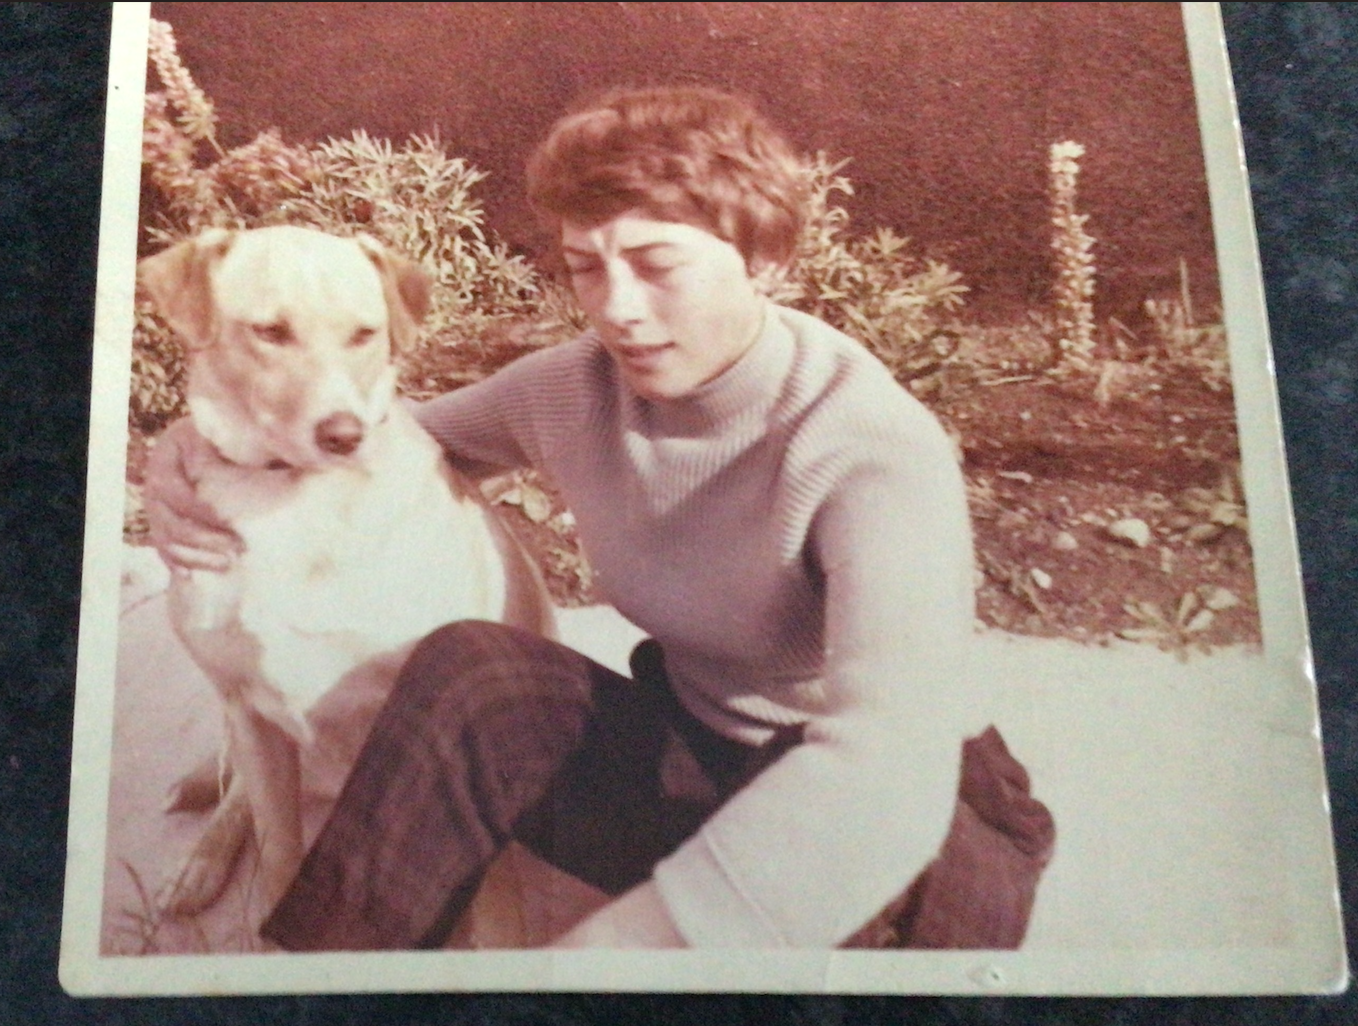 Photo of a 1950s photograph of Edna, a woman wearing a light colored sweater and dark pants as she sits on the ground outside next to her dog, Major. Her arm is around him.